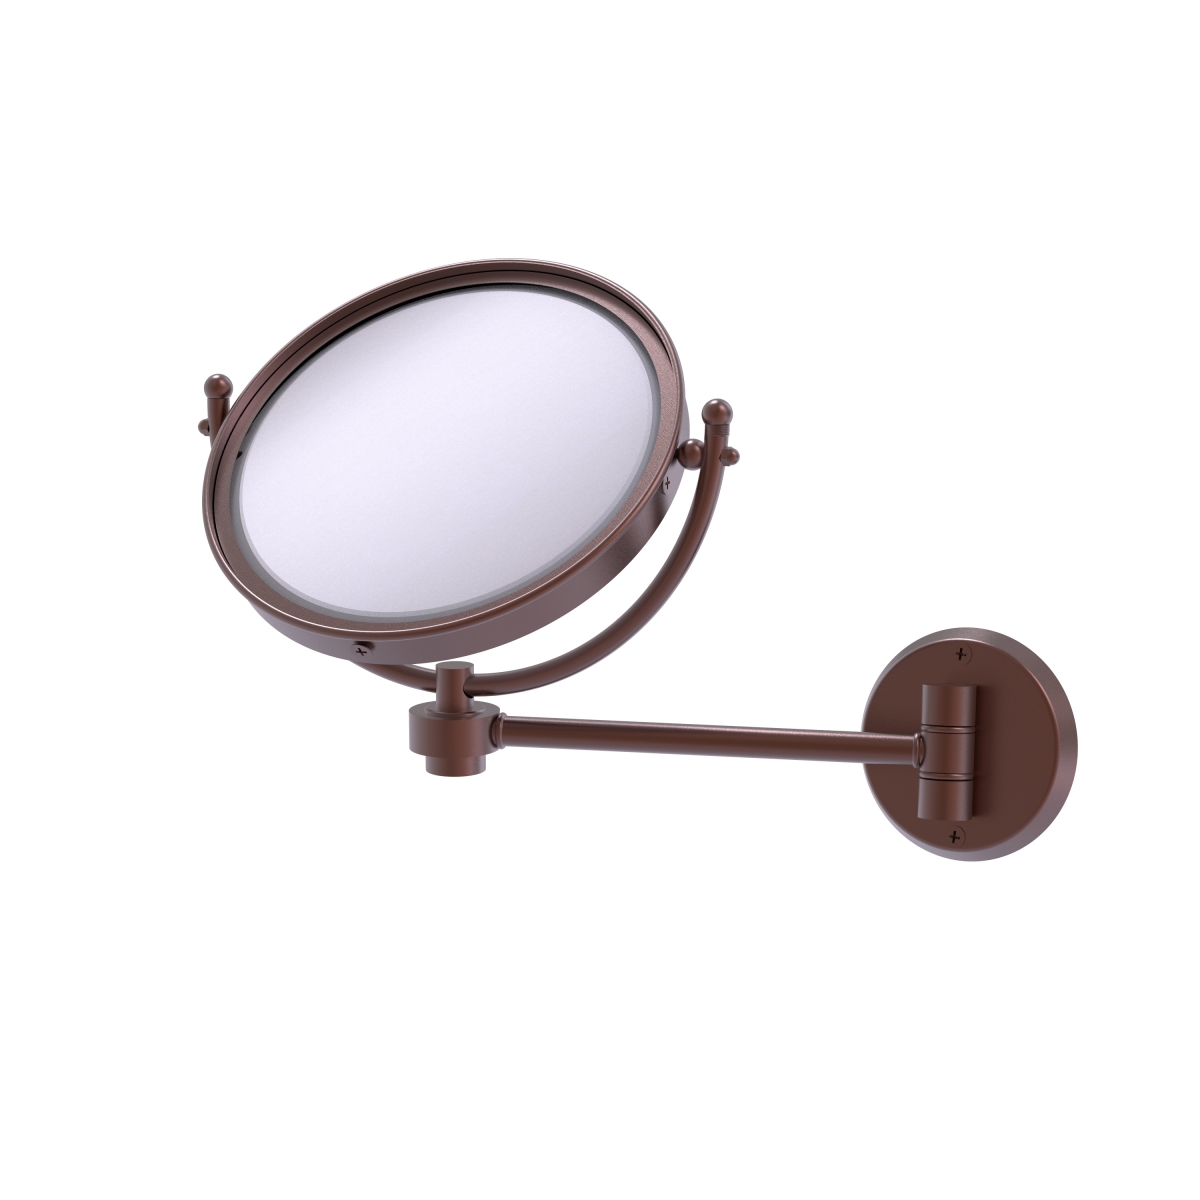 WM-5-4X-CA 8 in. Wall Mounted Make-Up Mirror 4X Magnification, Antique Copper - 10 x 8 x 11 in -  Allied Brass, WM-5/4X-CA